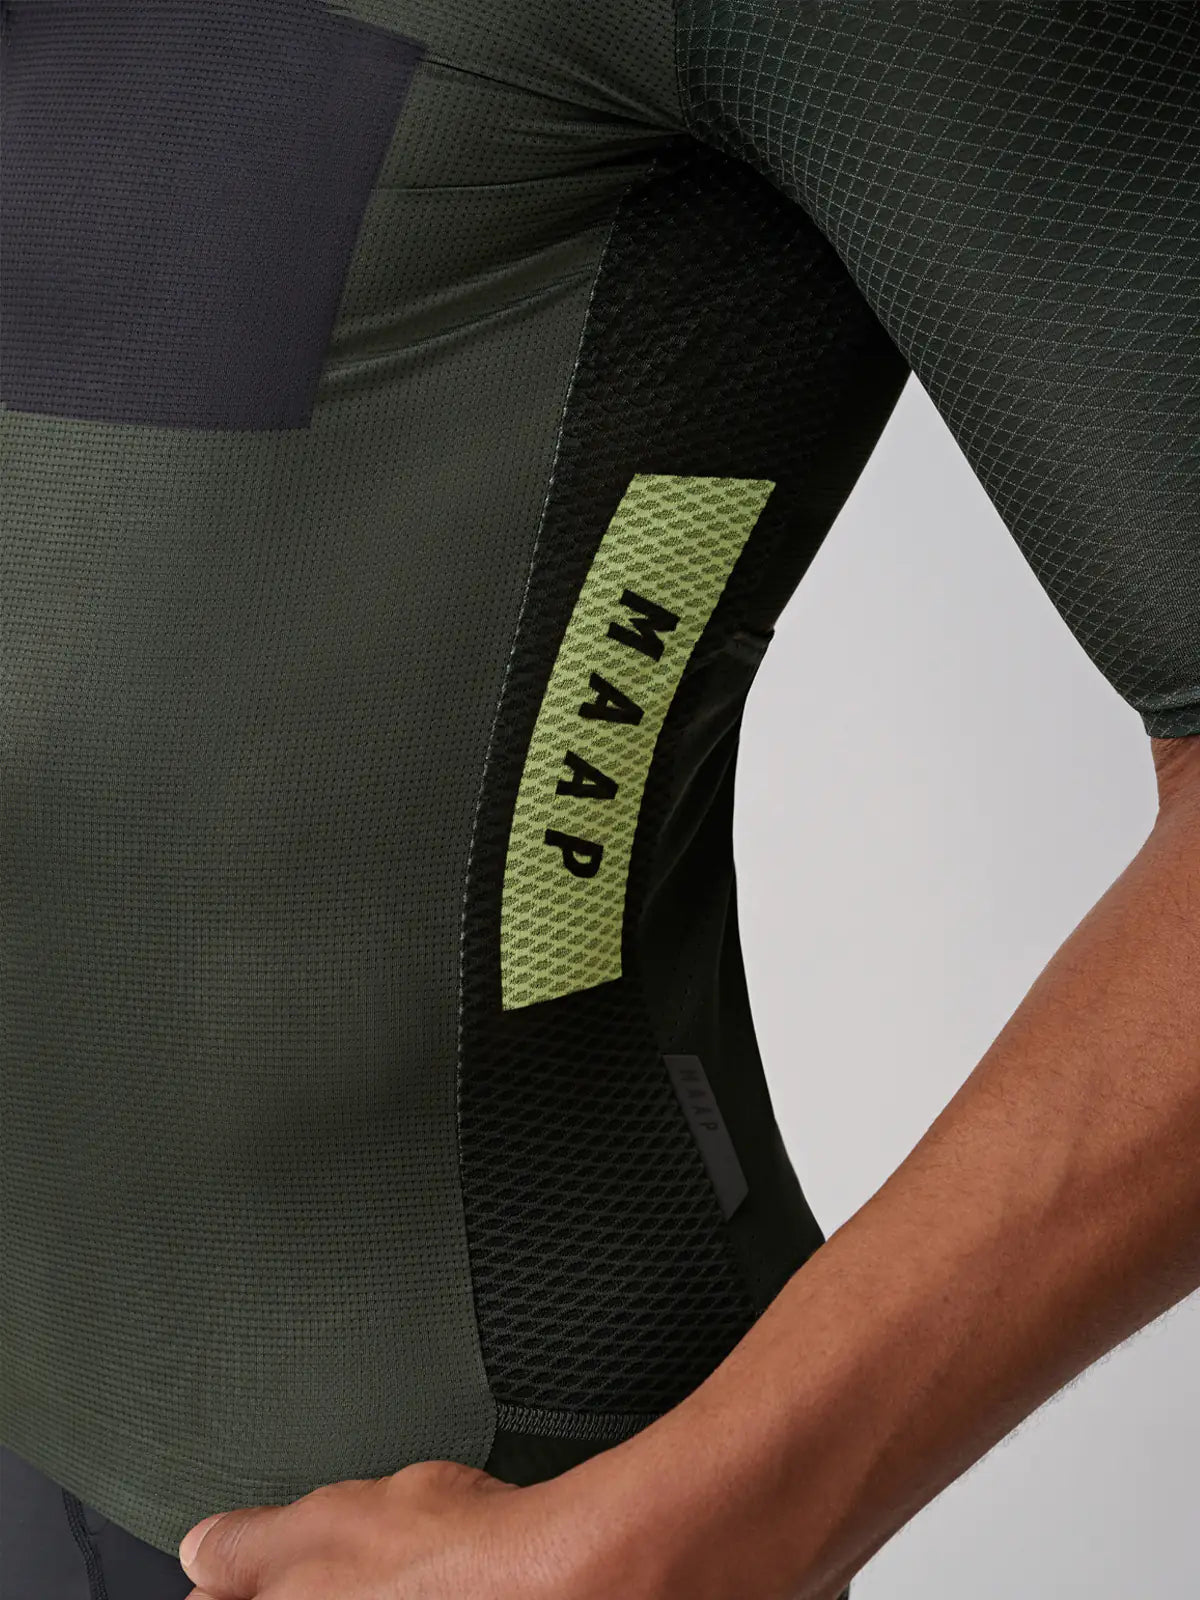 MAAP System Pro Air Jersey Bronze Green メンズ サイクルジャージ | CYCLISM